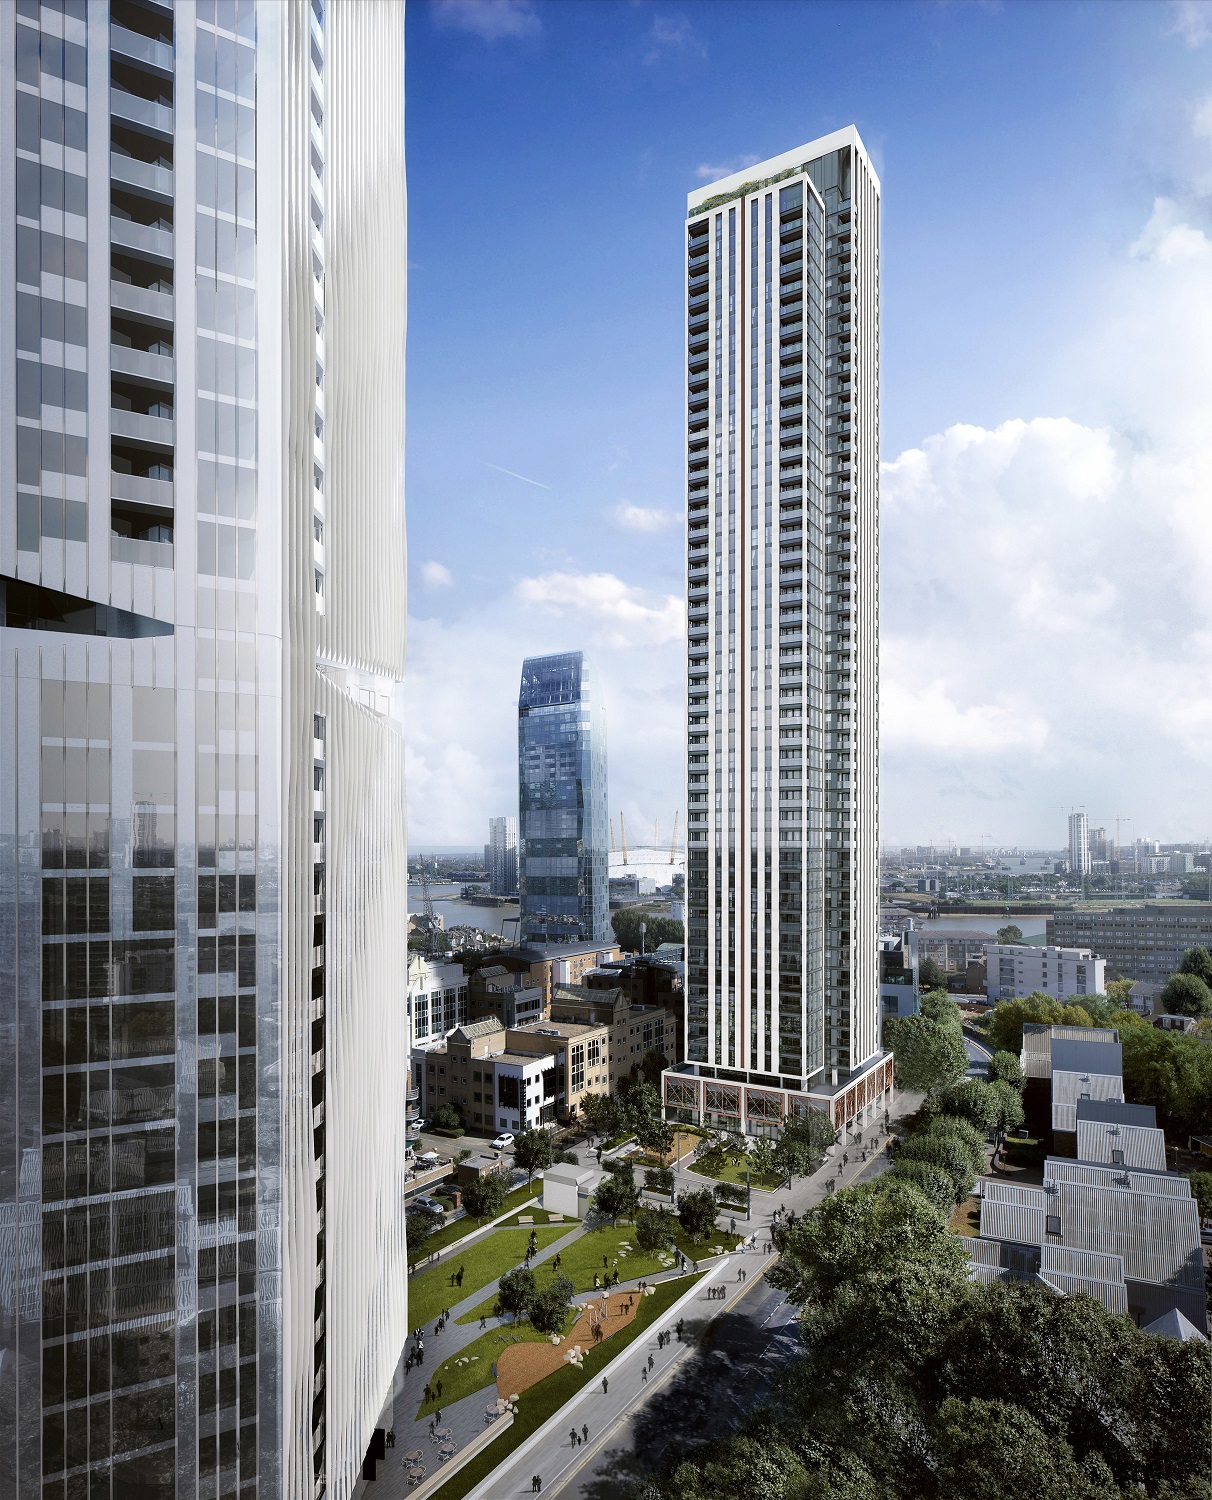 And finally... London skyscraper approved thanks to virtual reality